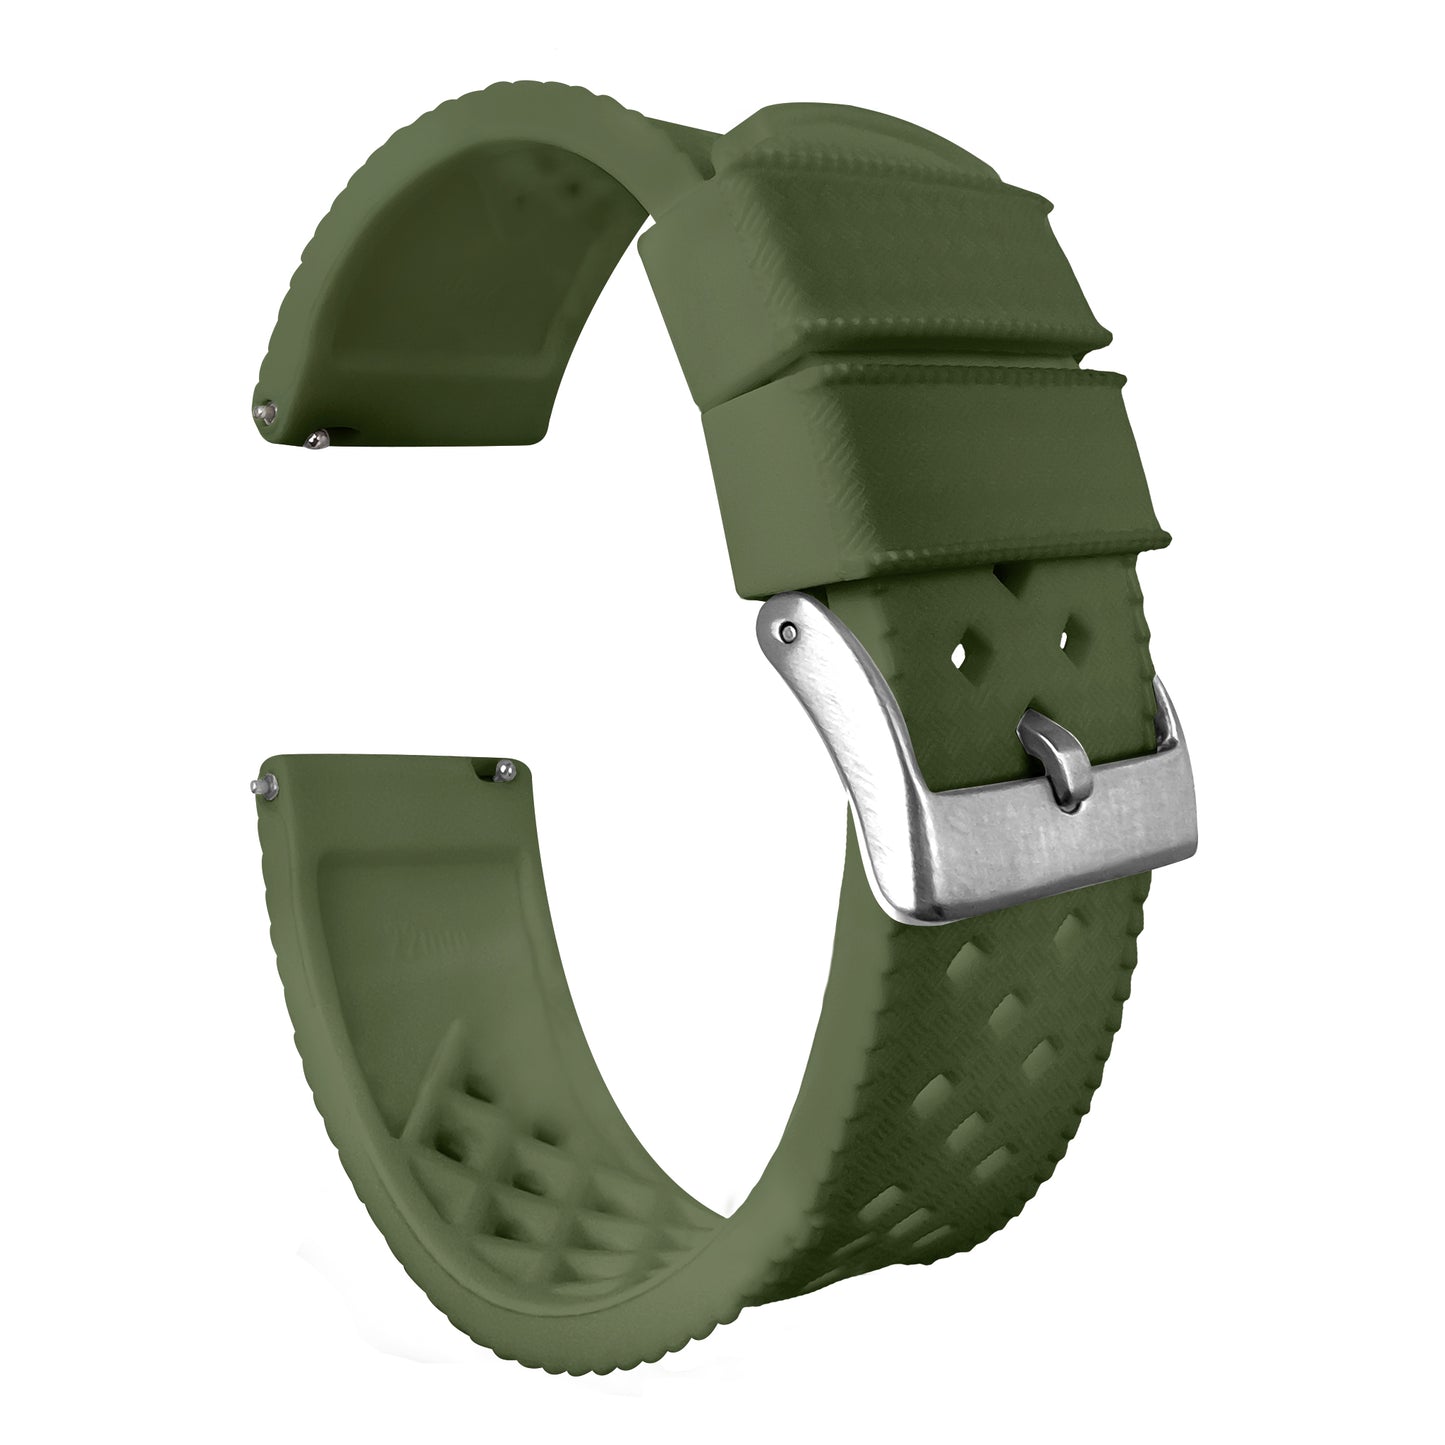 Samsung Galaxy Watch Active Tropical Style Army Green Watch Band